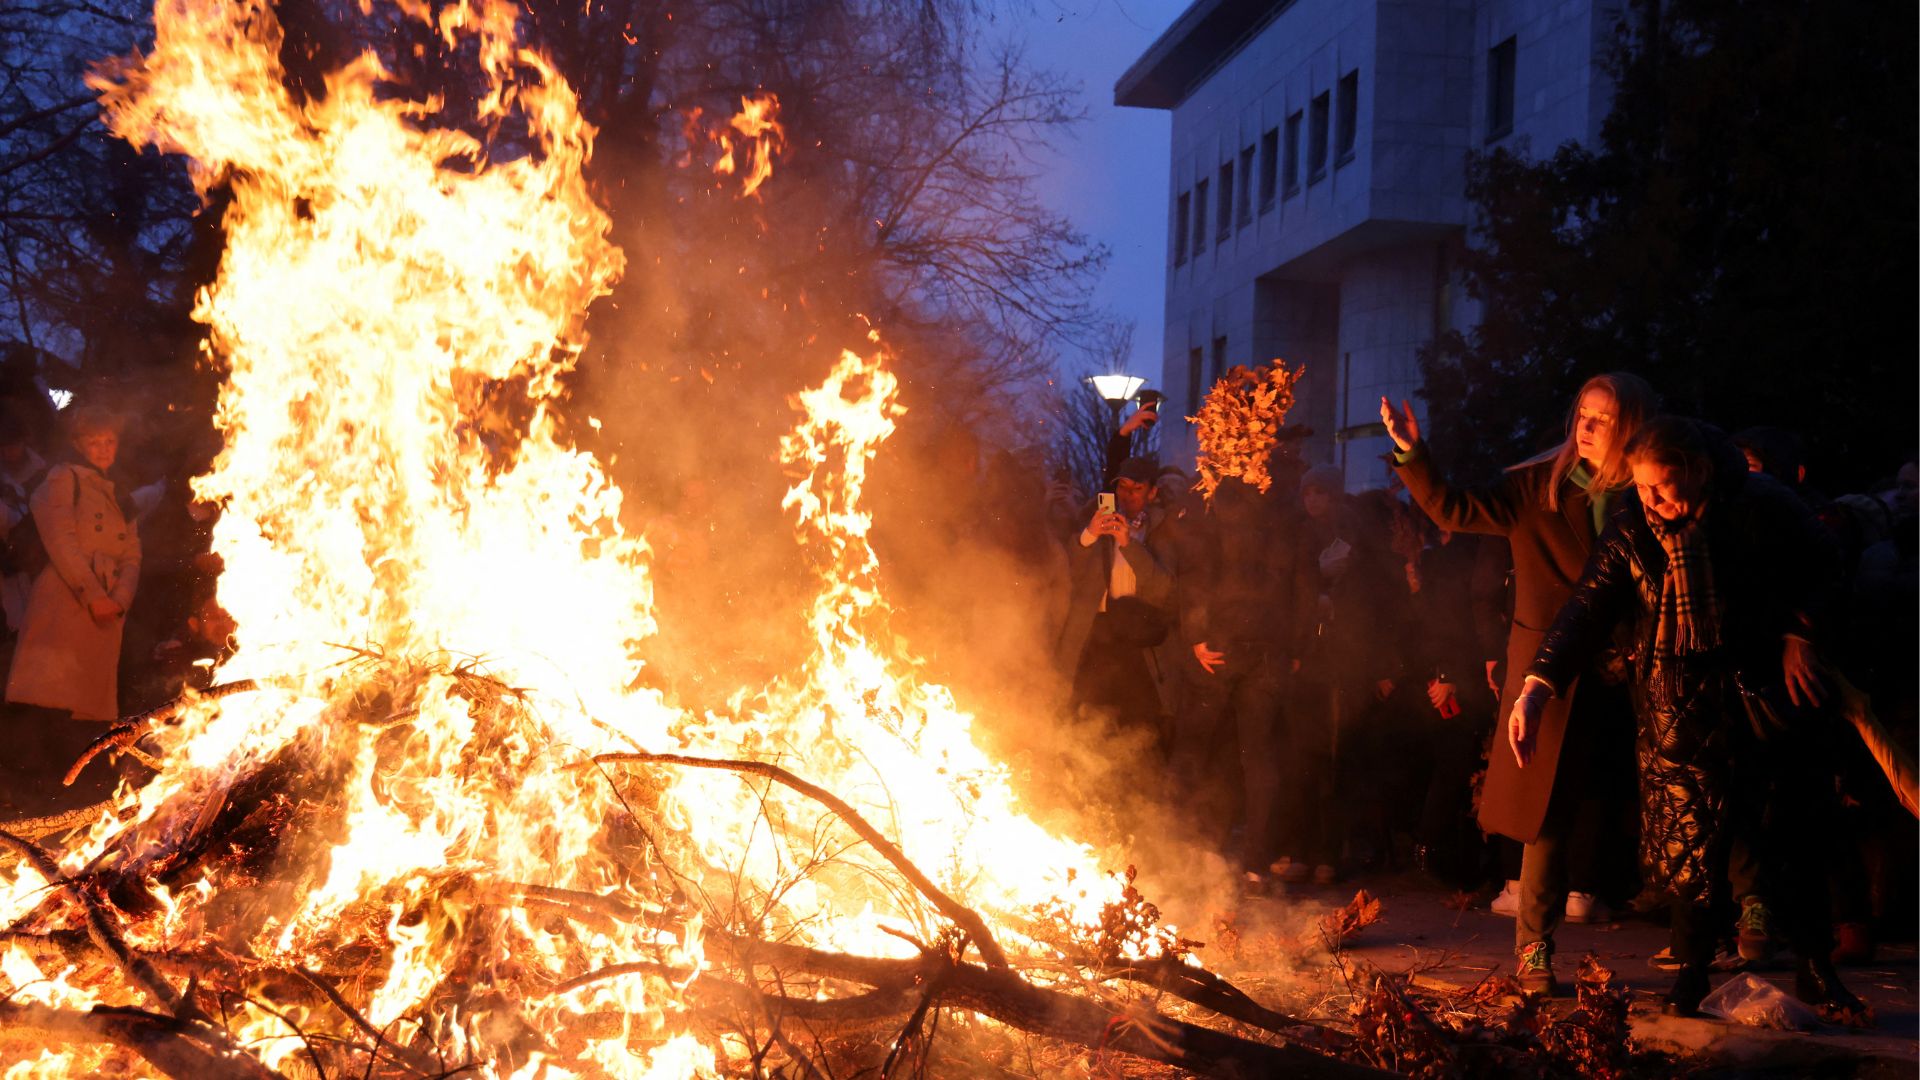 Orthodox Christians burn dried oak branches as they celebrate Christmas Eve in Belgrade, Serbia. /Zorana Jevtic/Reuters